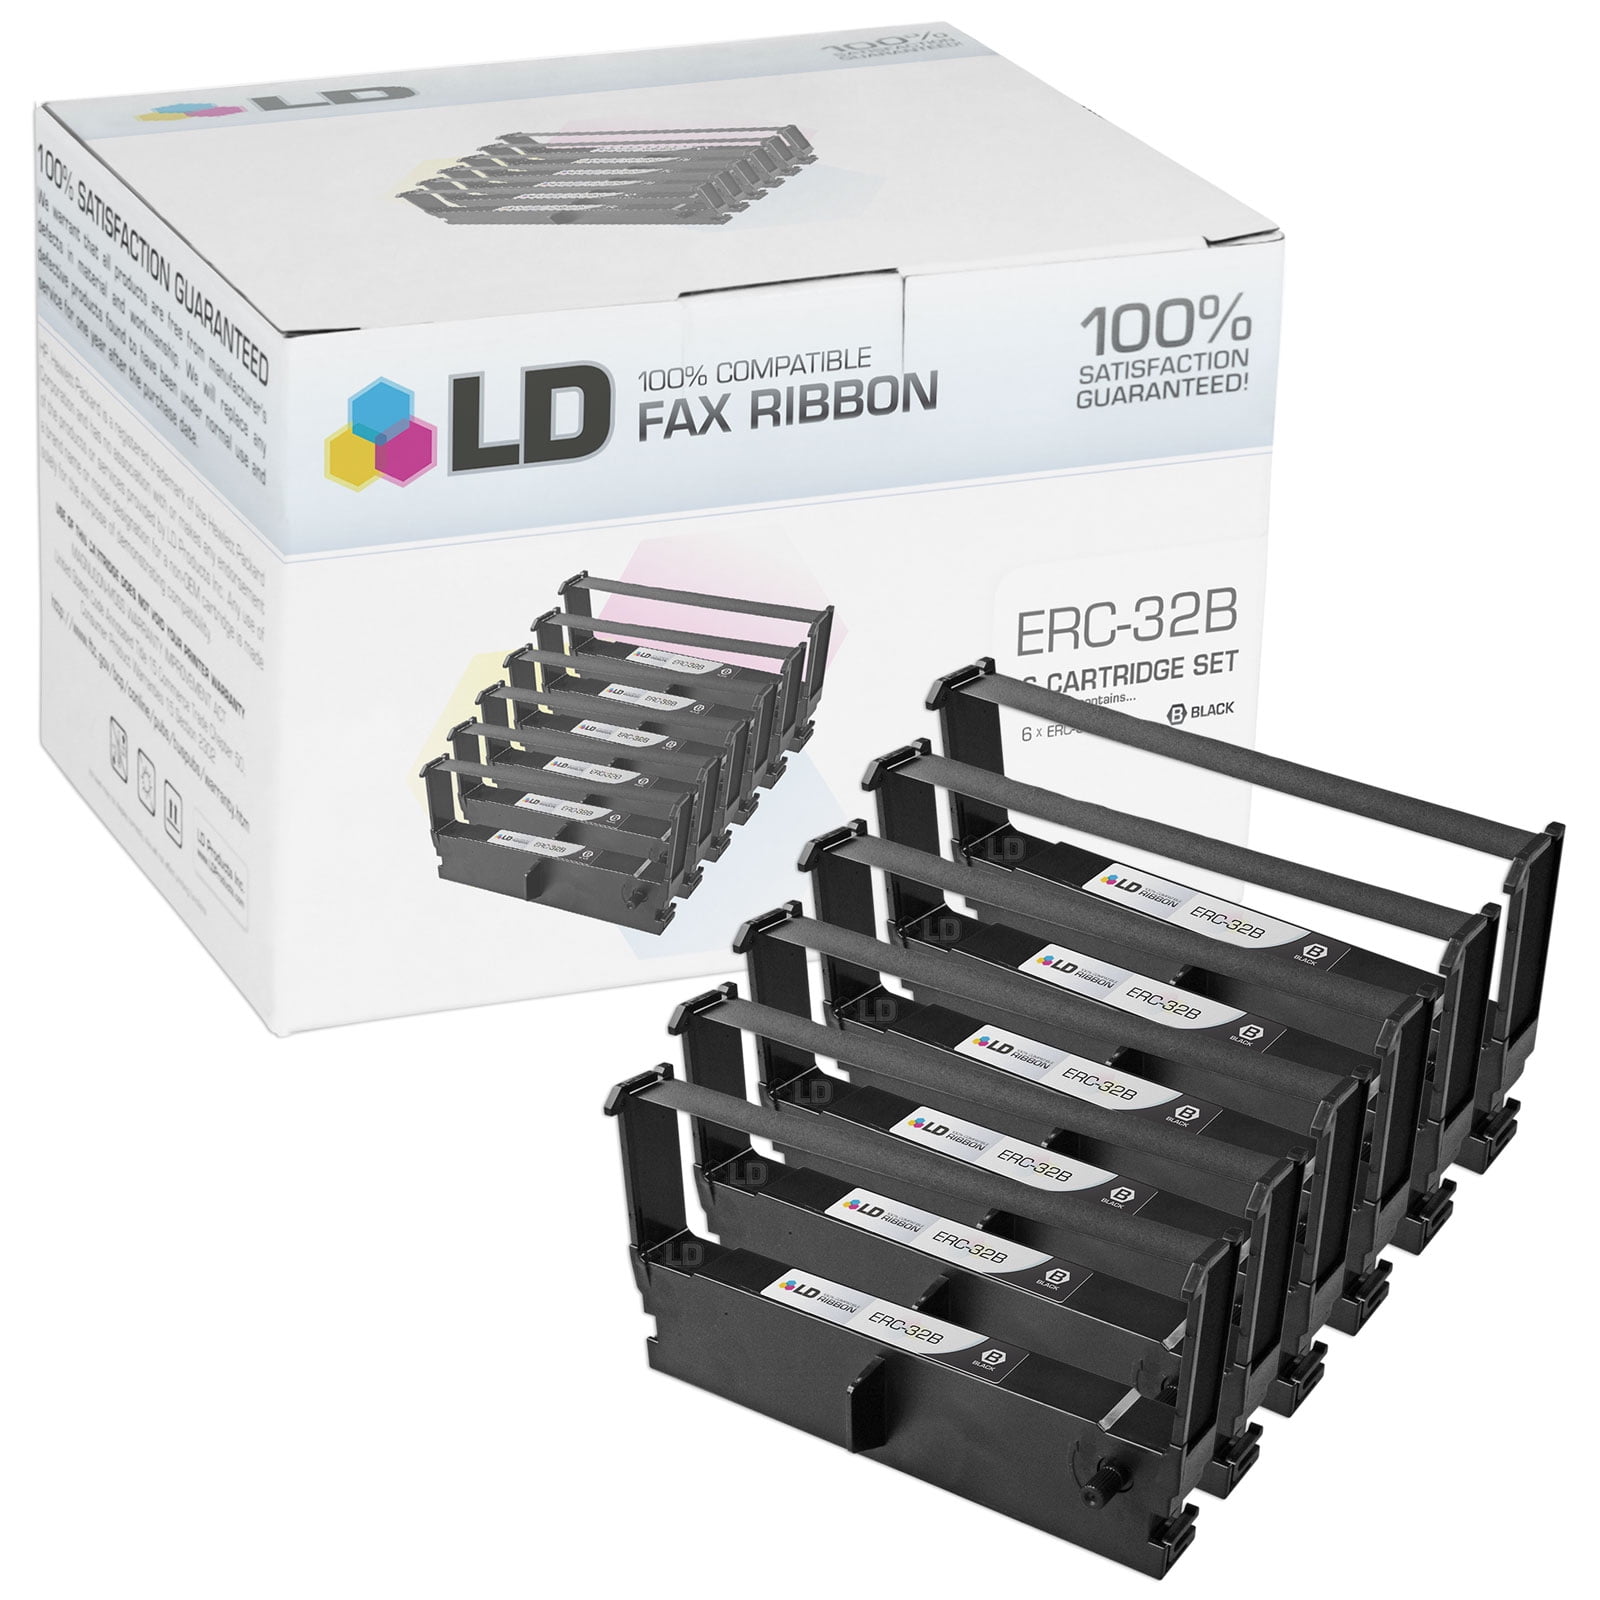 Black, 6-Pack LD Compatible POS Ribbon Cartridge Replacement for Epson ERC-32B 